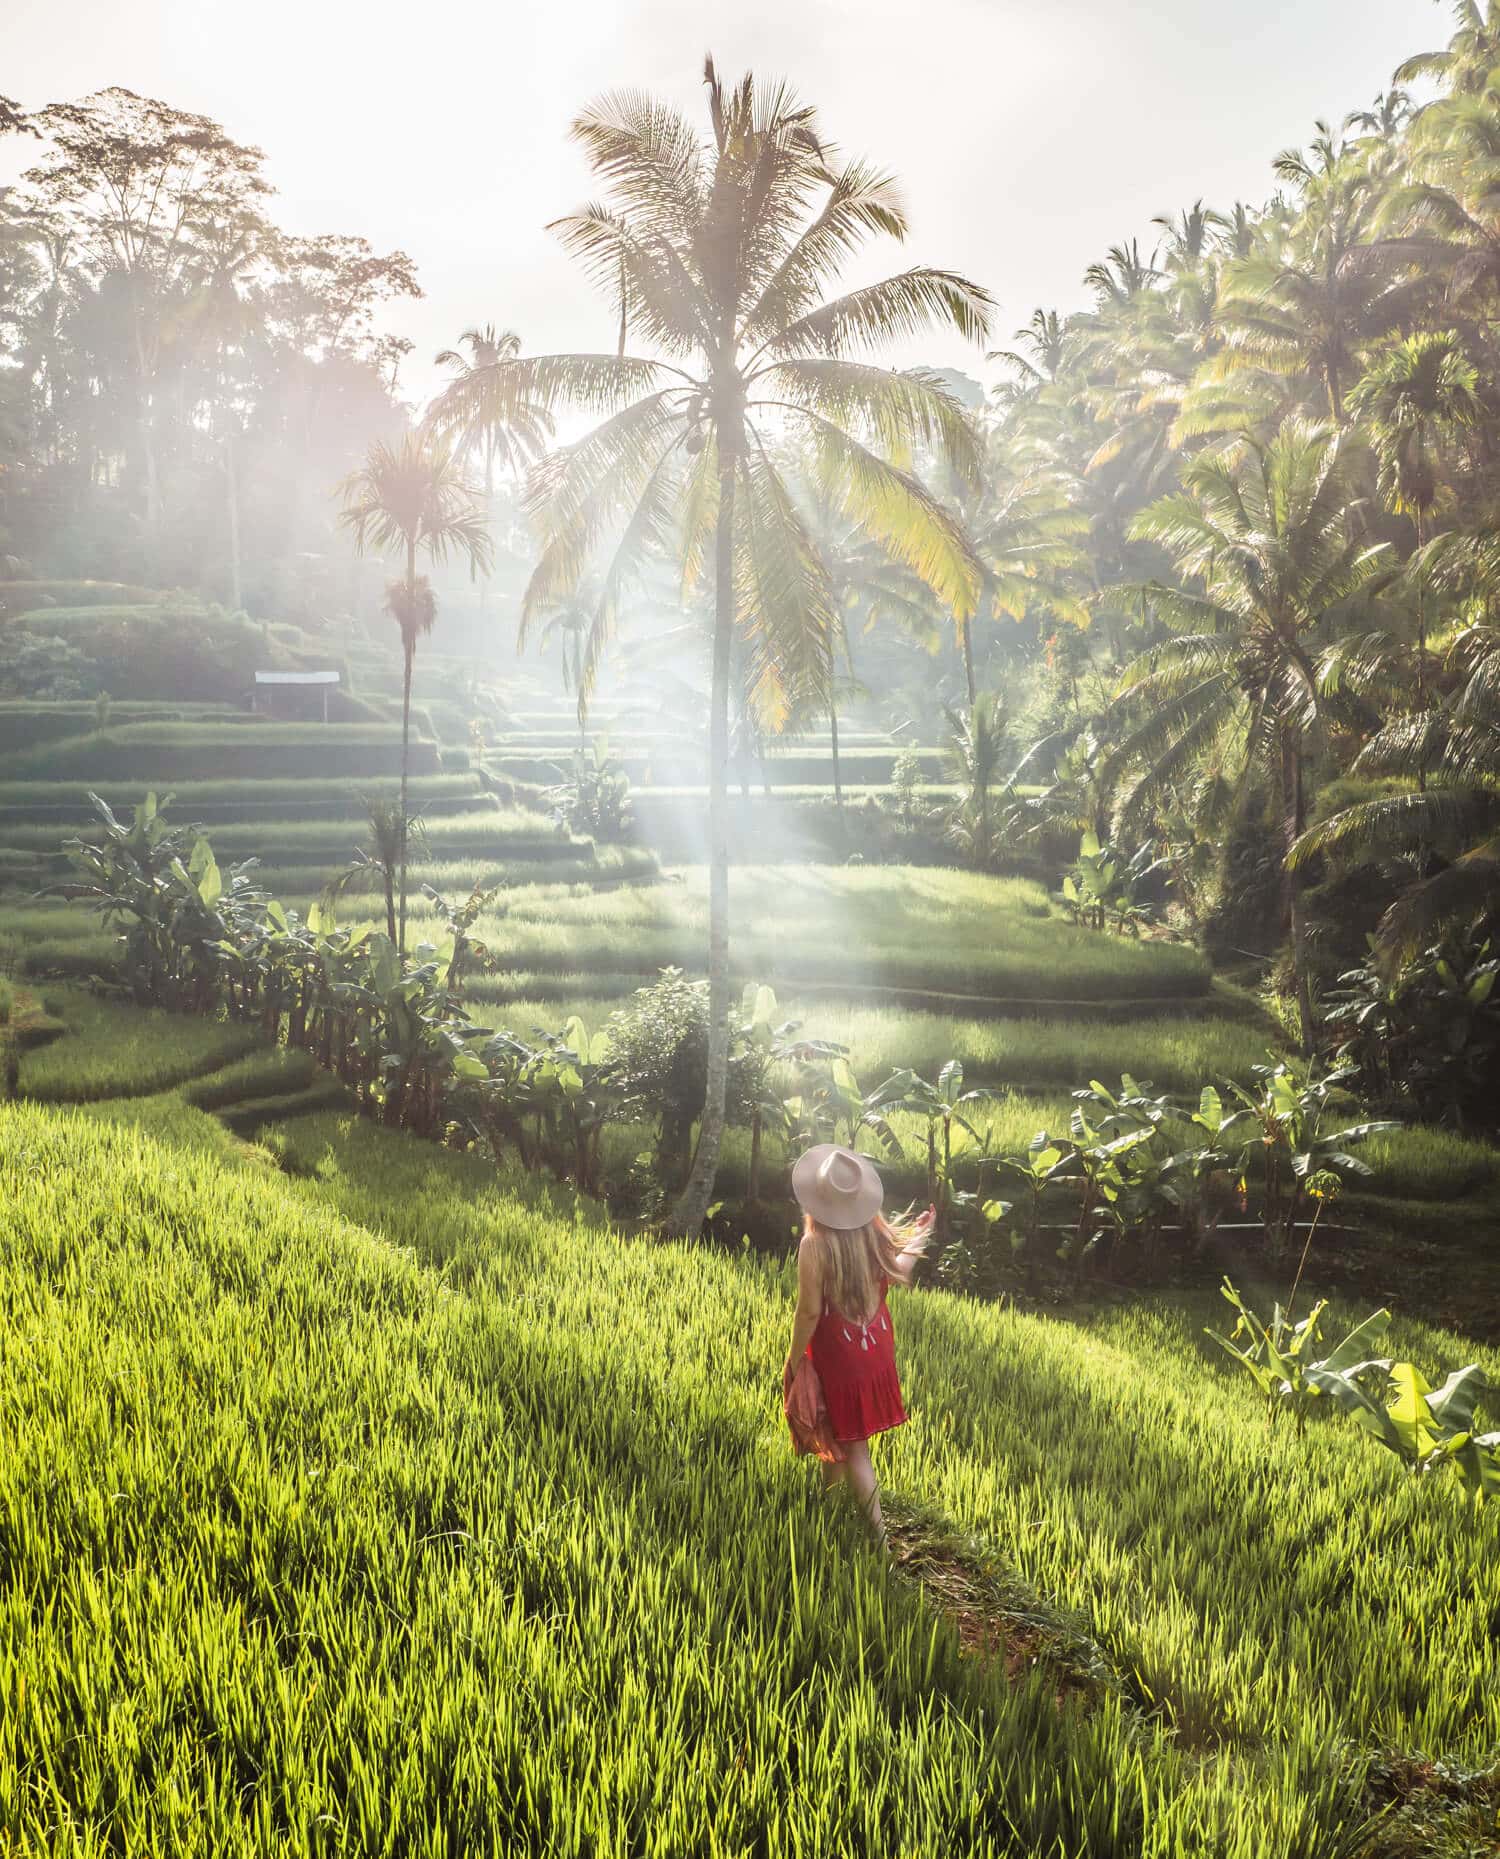 Girl with link hear wearing a beige hat and a red dress walking in the lush green rice fields of Tegalalang with the early morning light peeking through the palm trees during the rainy season in Bali.